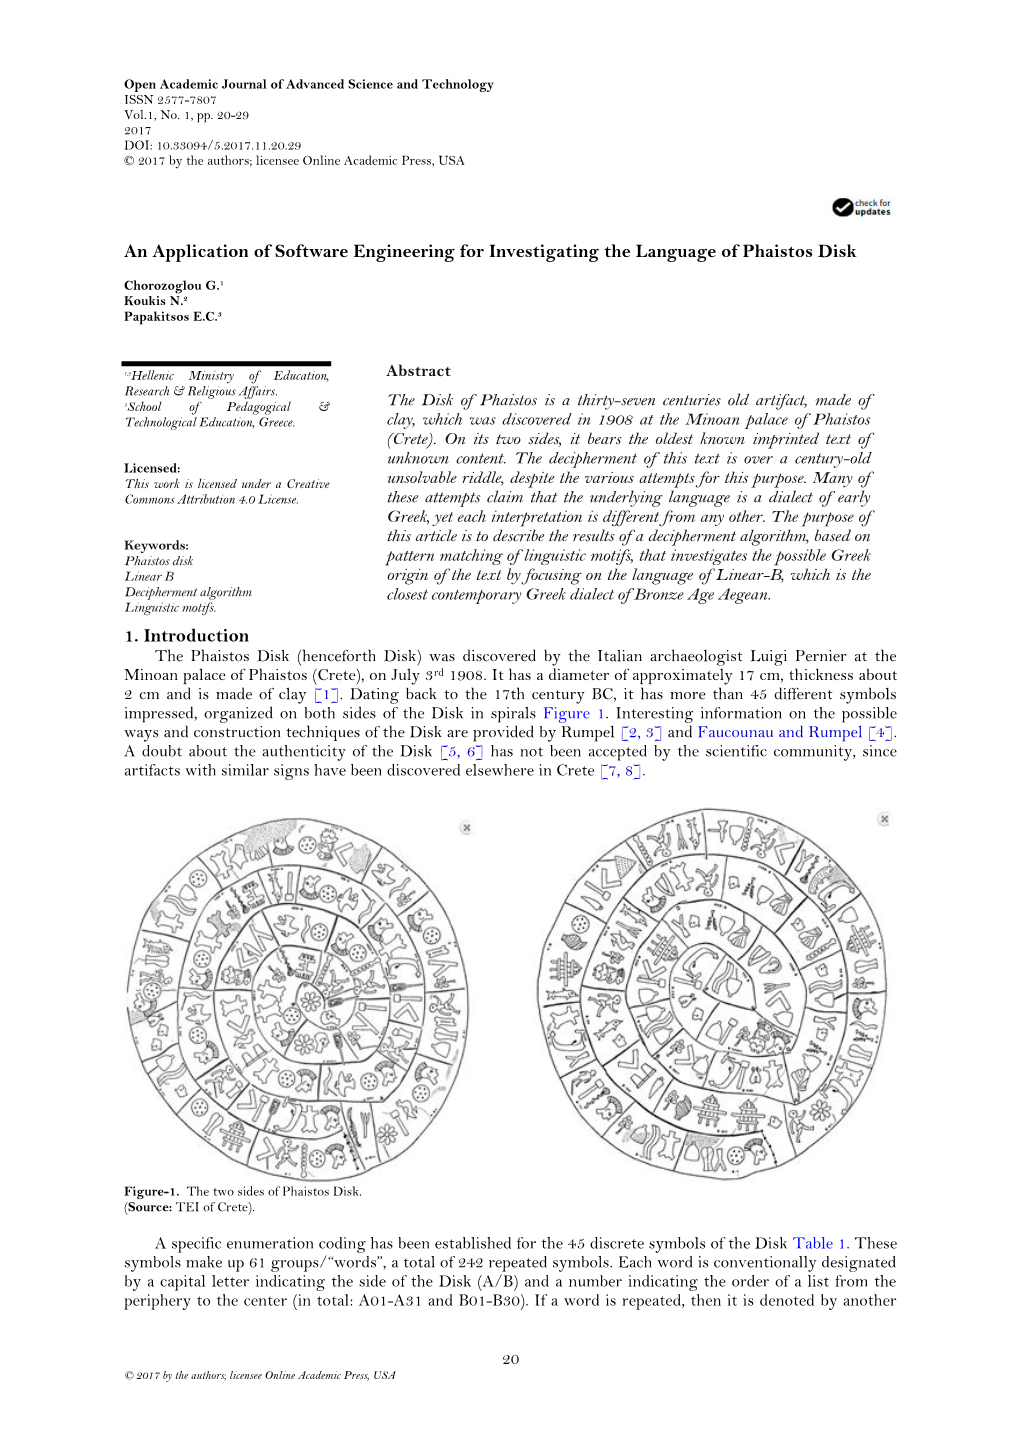 An Application of Software Engineering for Investigating the Language of Phaistos Disk 1. Introduction